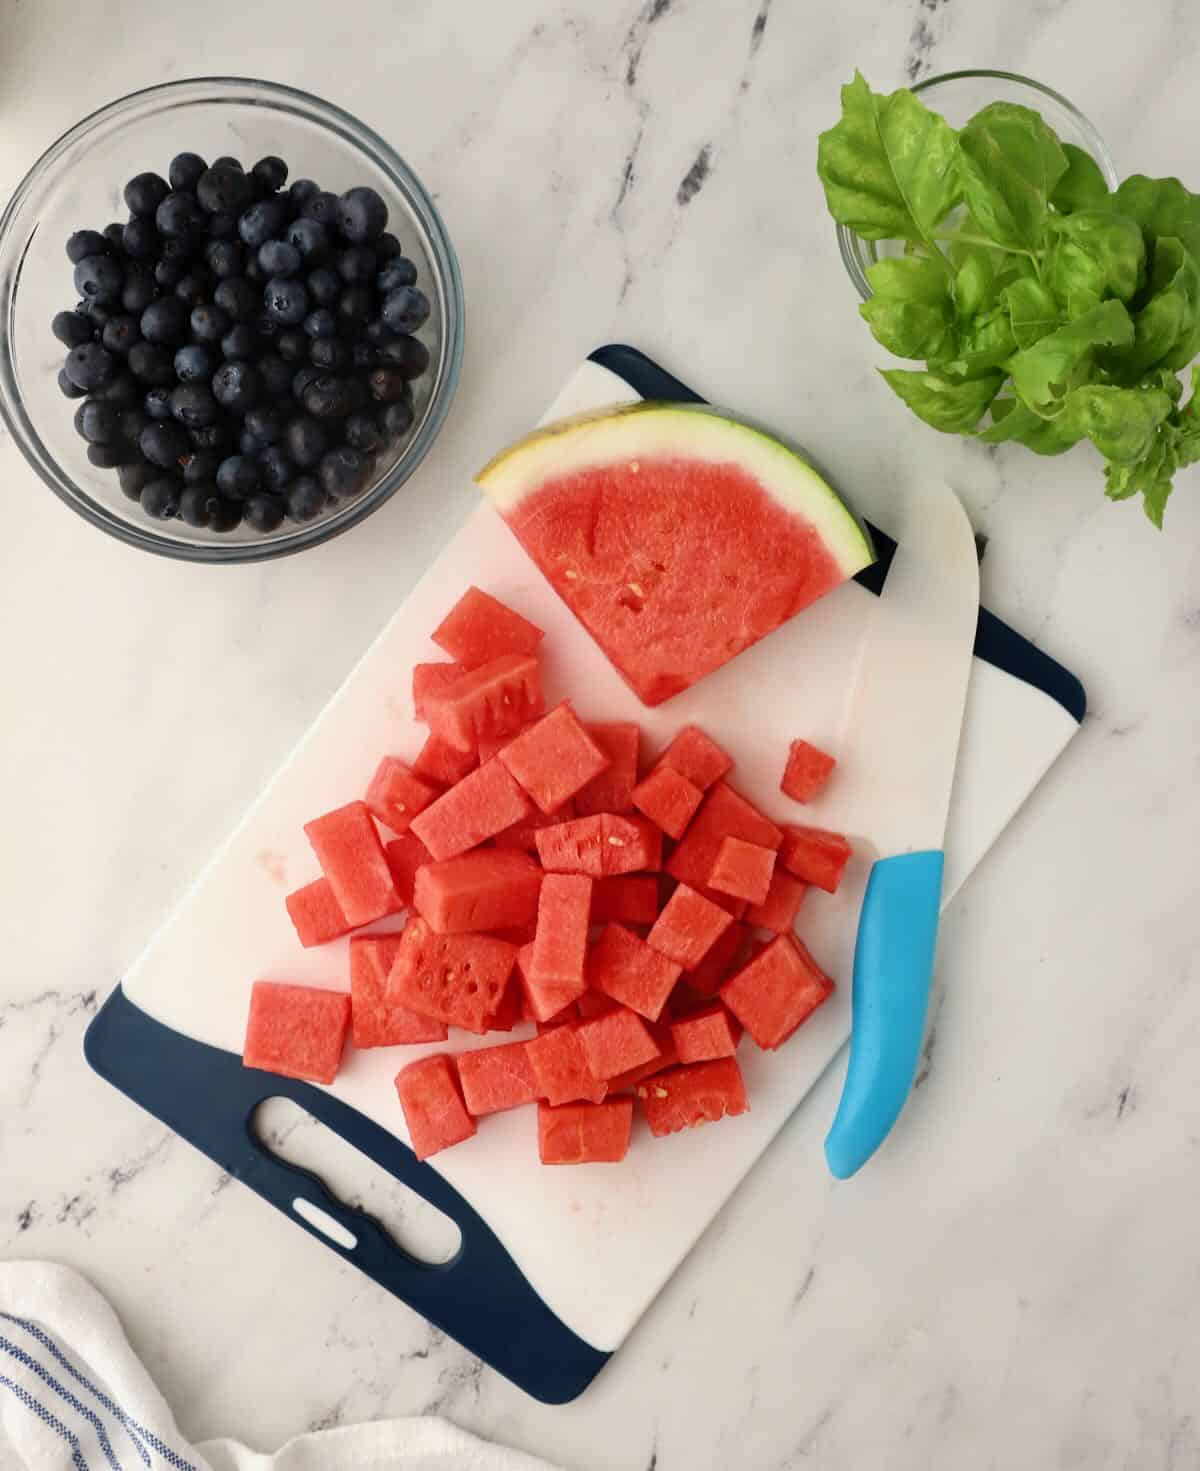 Cutting watermelon up into cubes. 